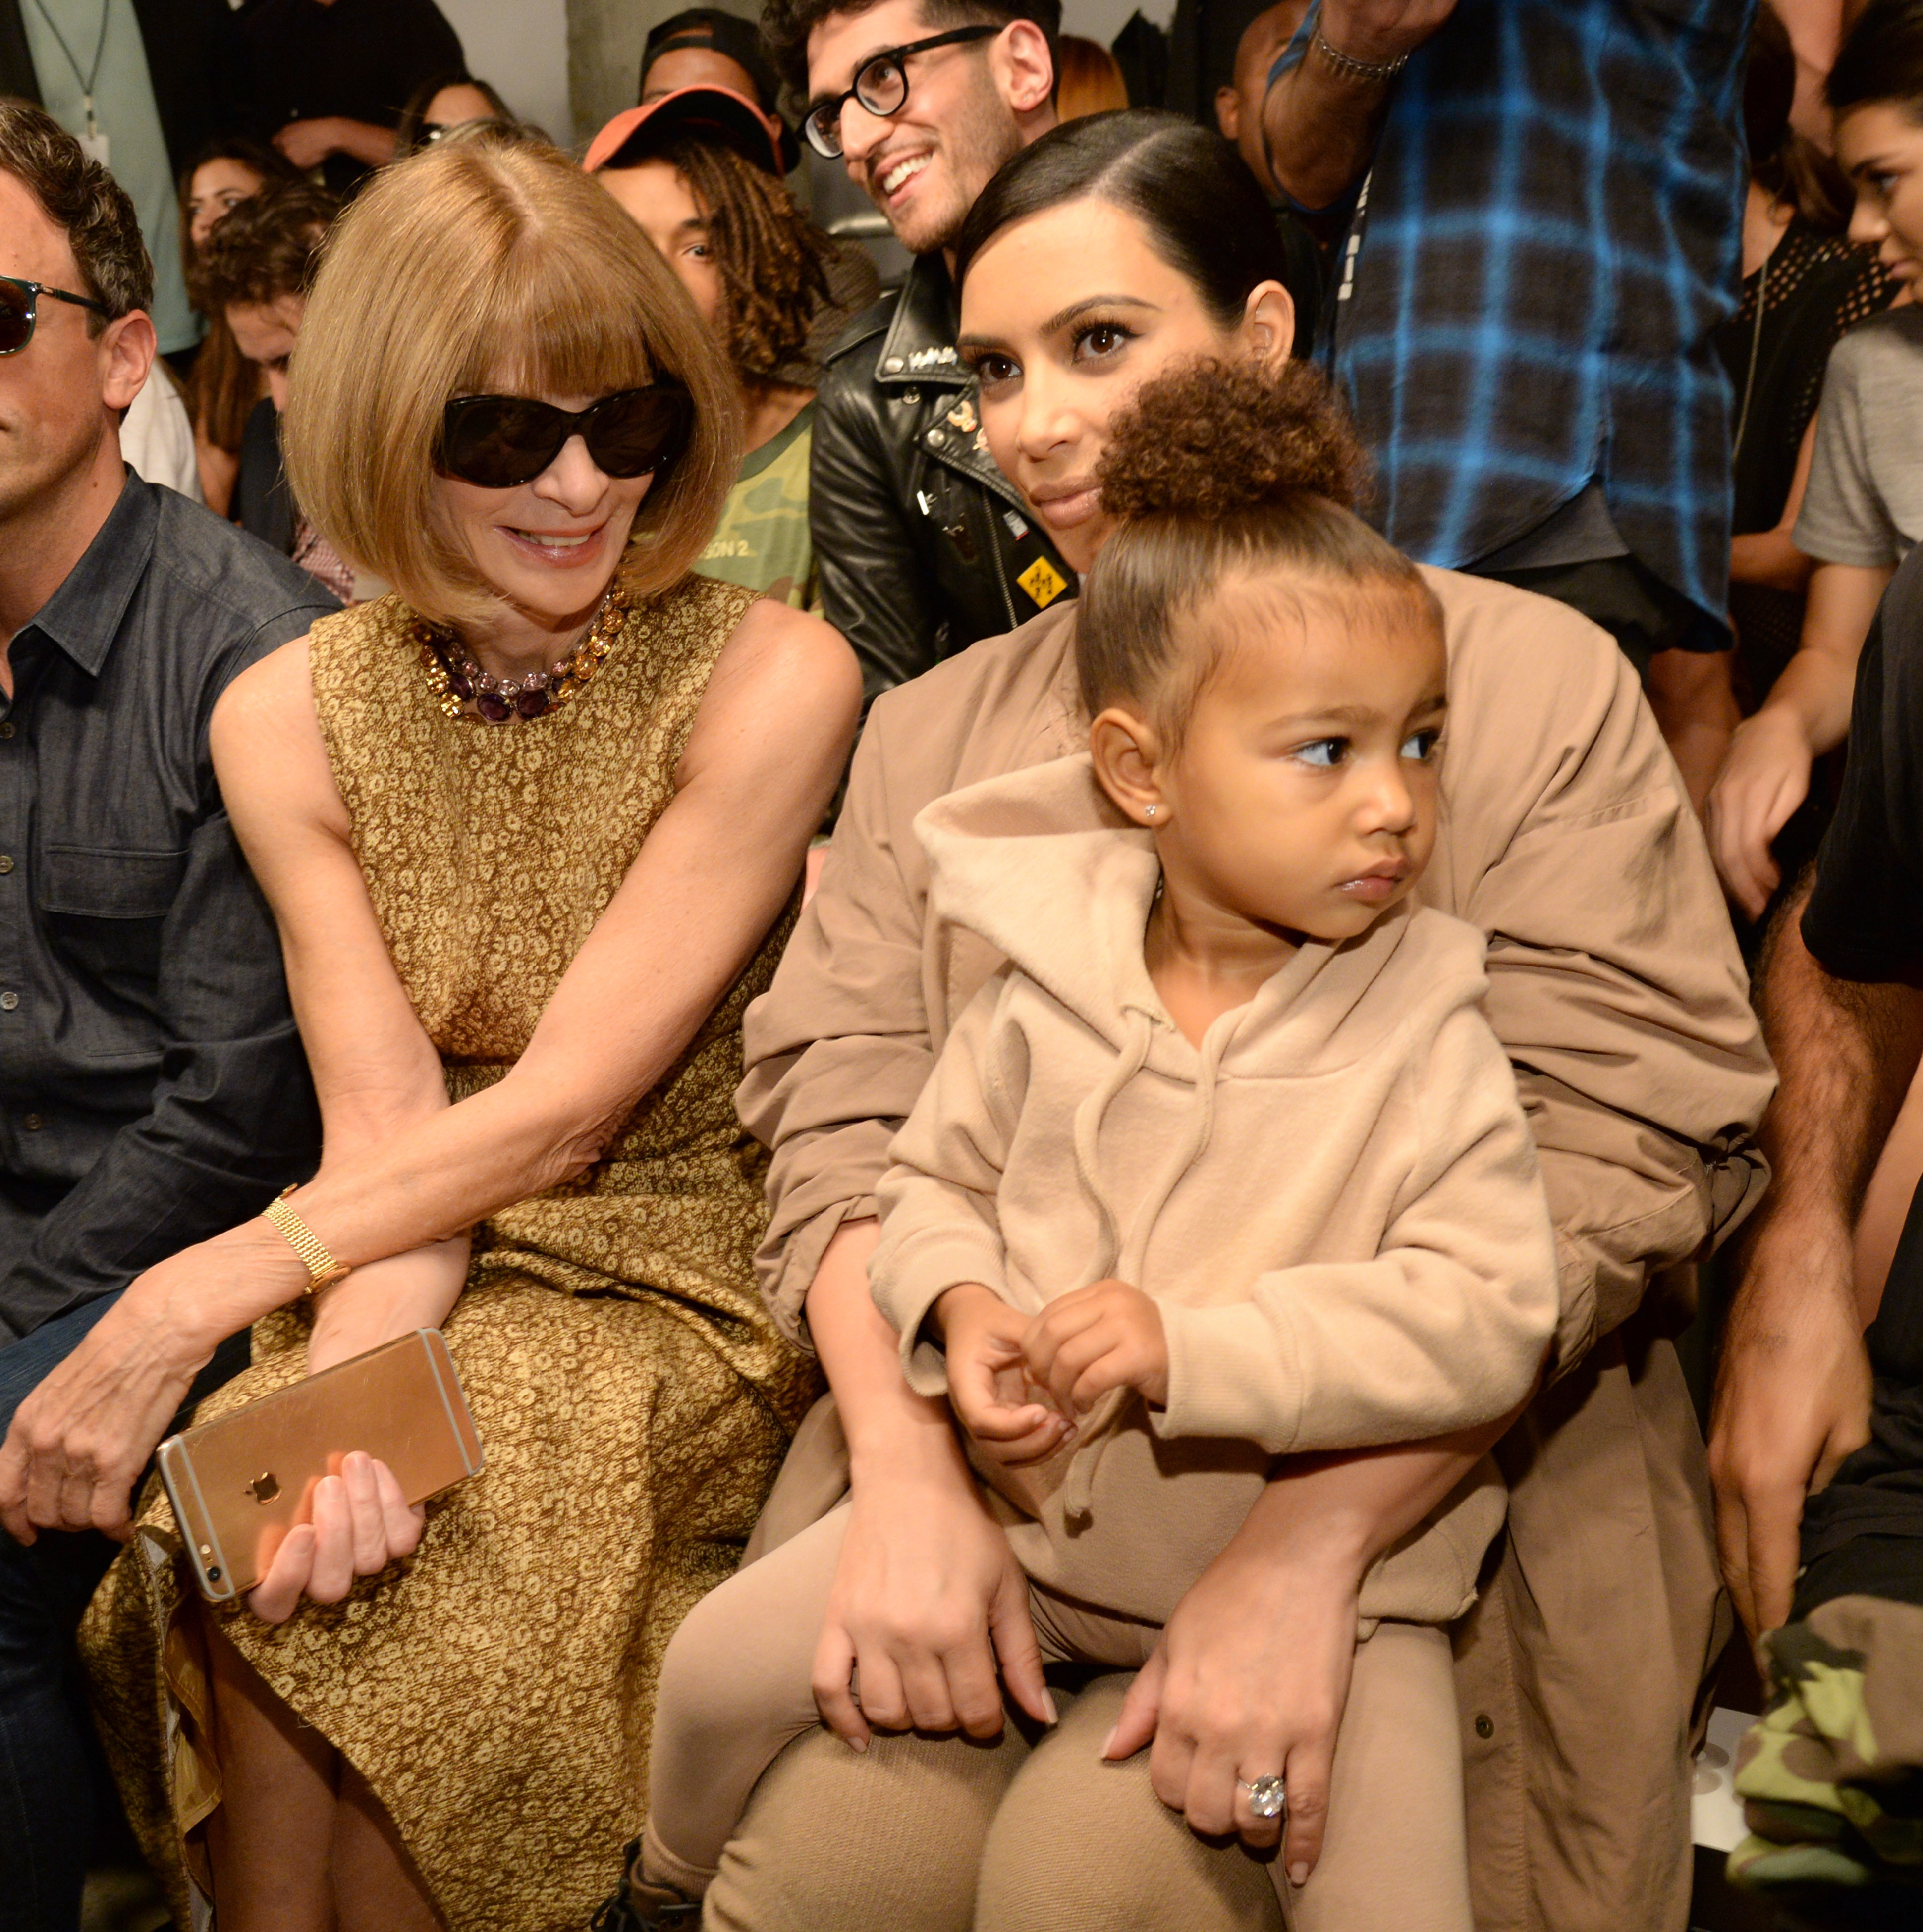 Anna Wintour, Kim Kardashian West, and North West attend Kanye West Yeezy Season 2 during New York Fashion Week in New York City, on September 16, 2015. | Source: Getty Images